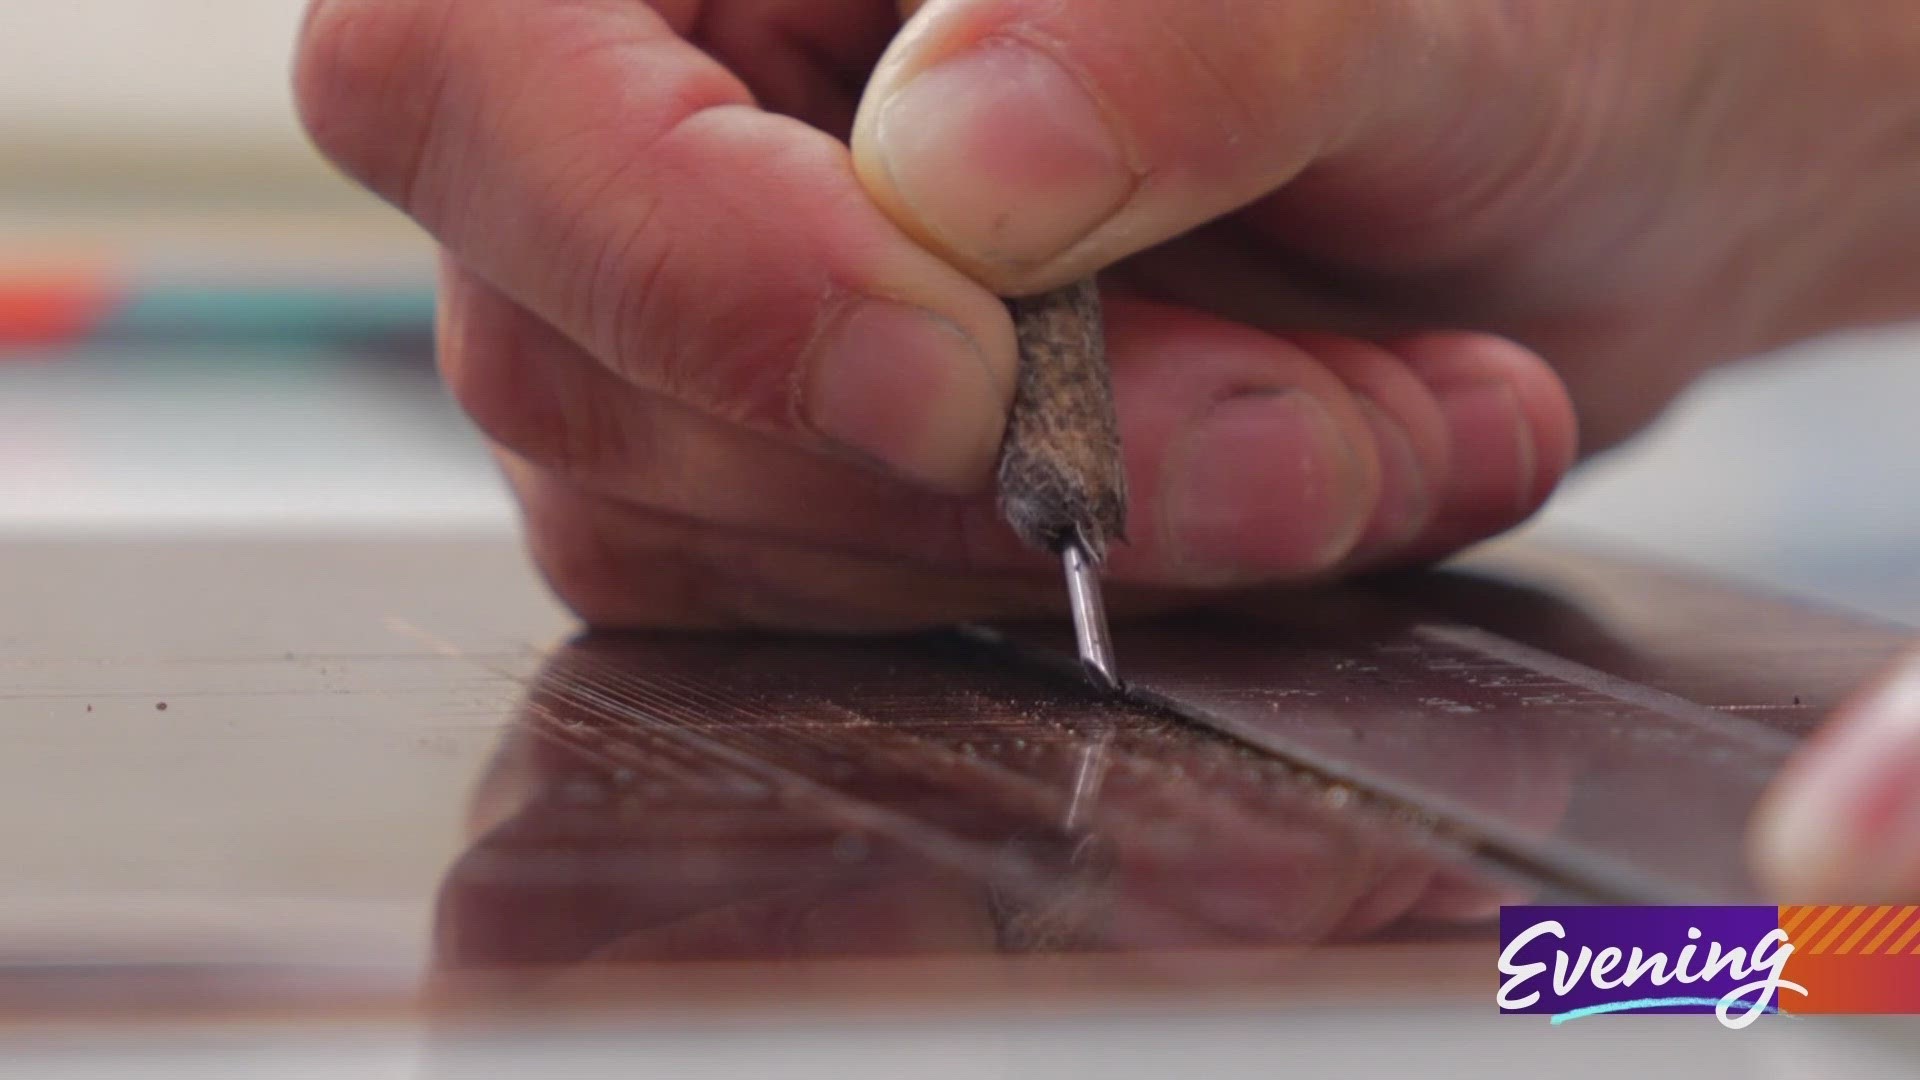 Kim Van Someren is a University of Washington instructor who specializes in copper printmaking, an art form made famous by Rembrandt. #k5evening